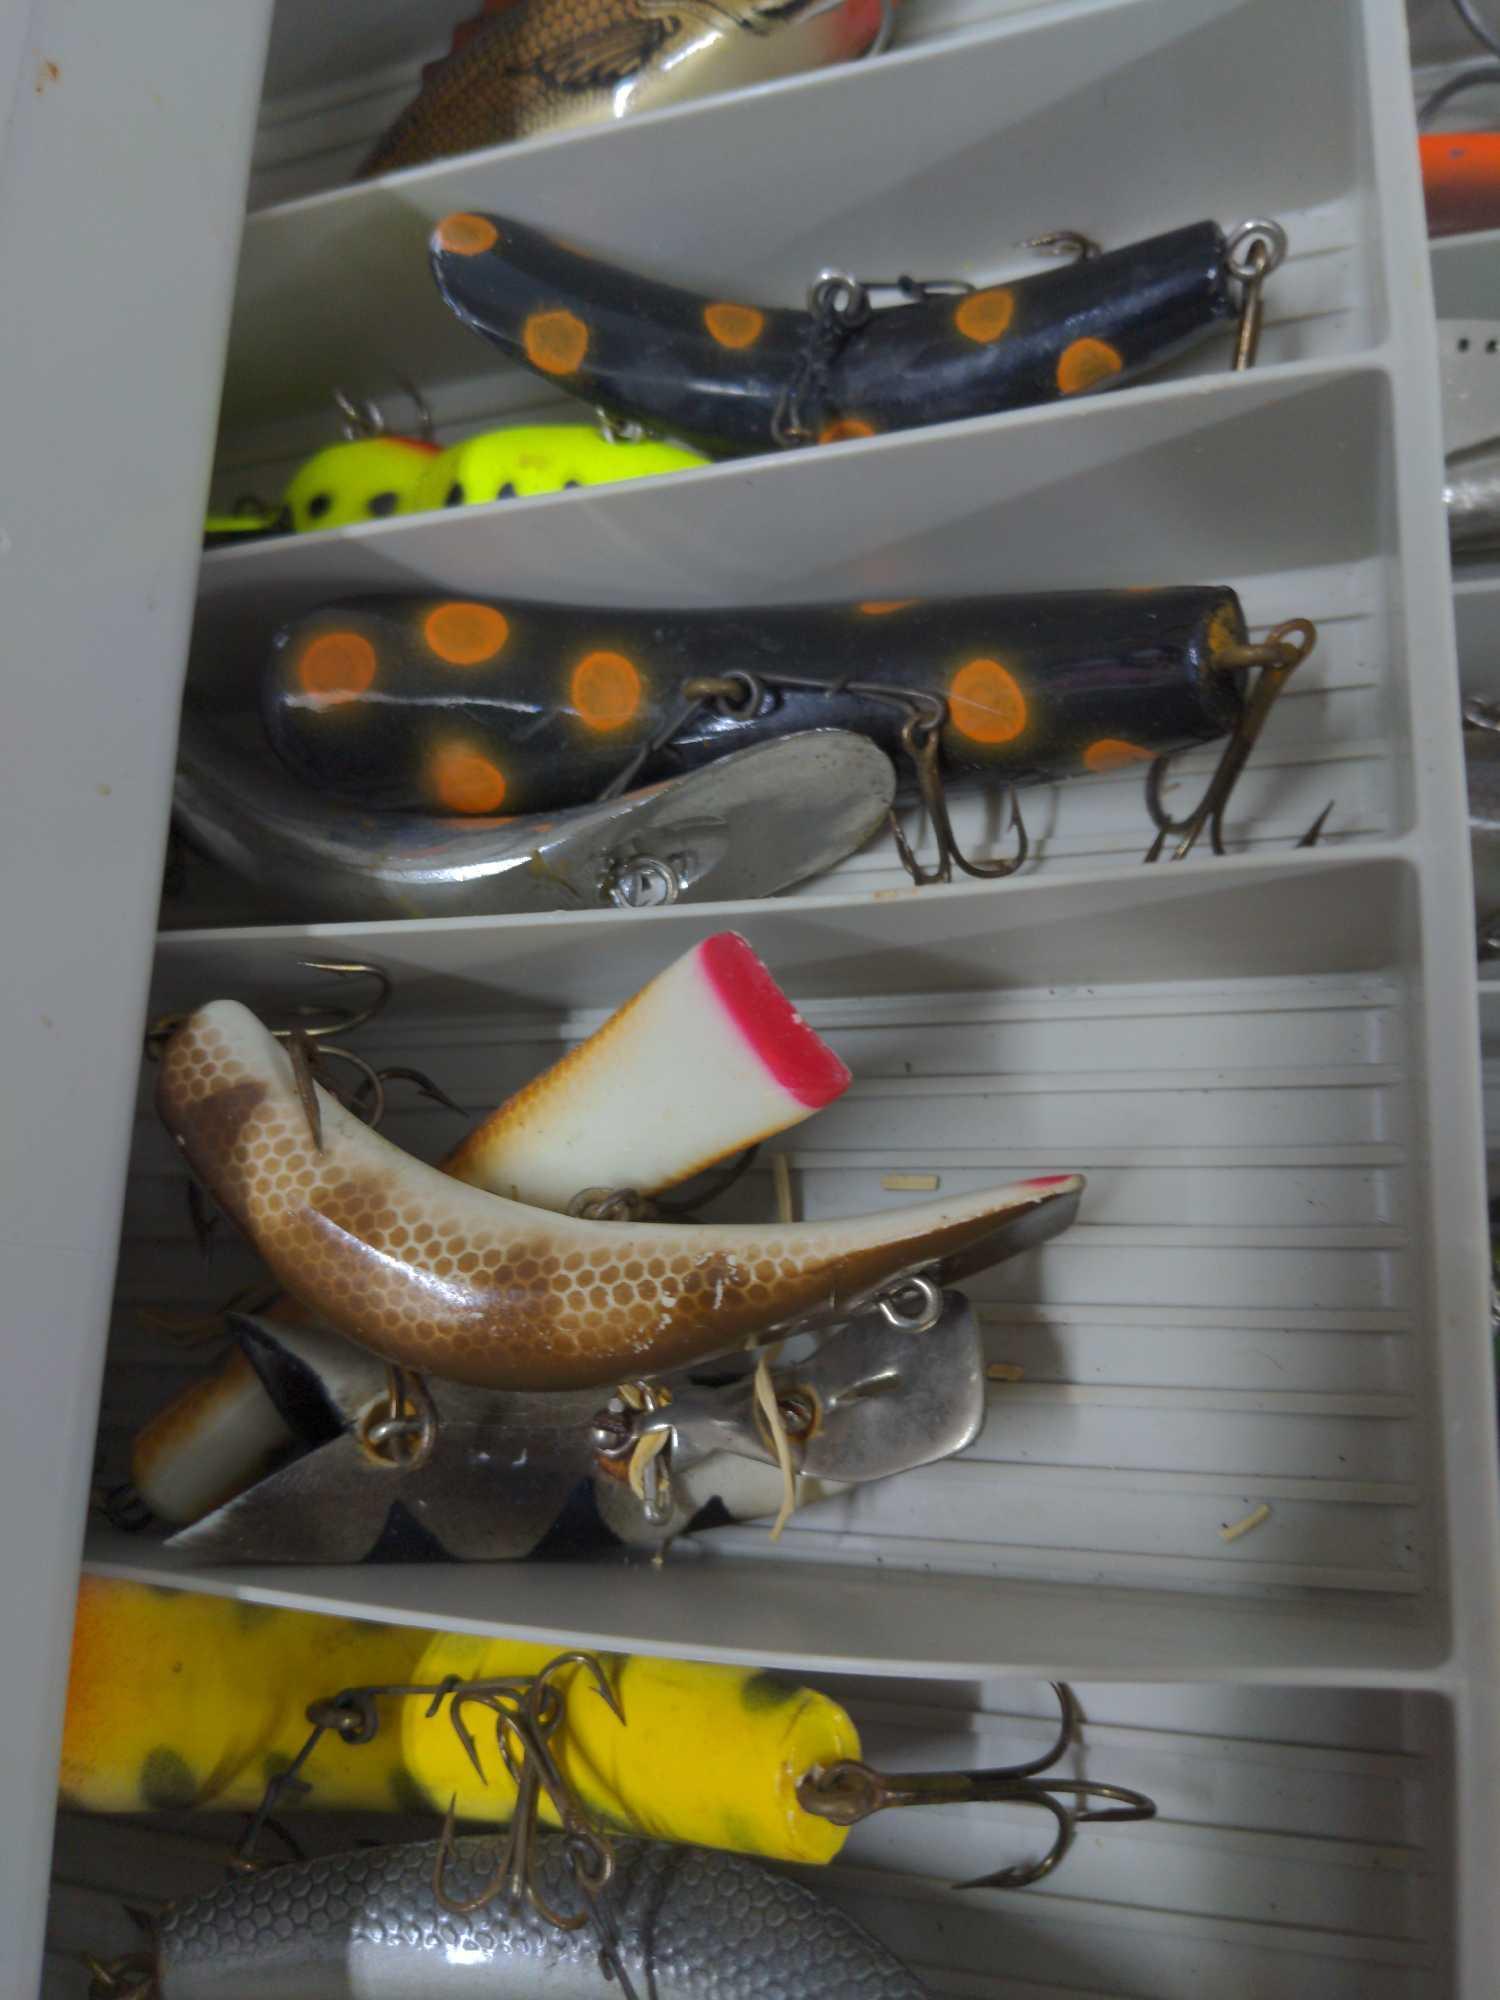 Huge Tackle Box full of Vintage fishing lures